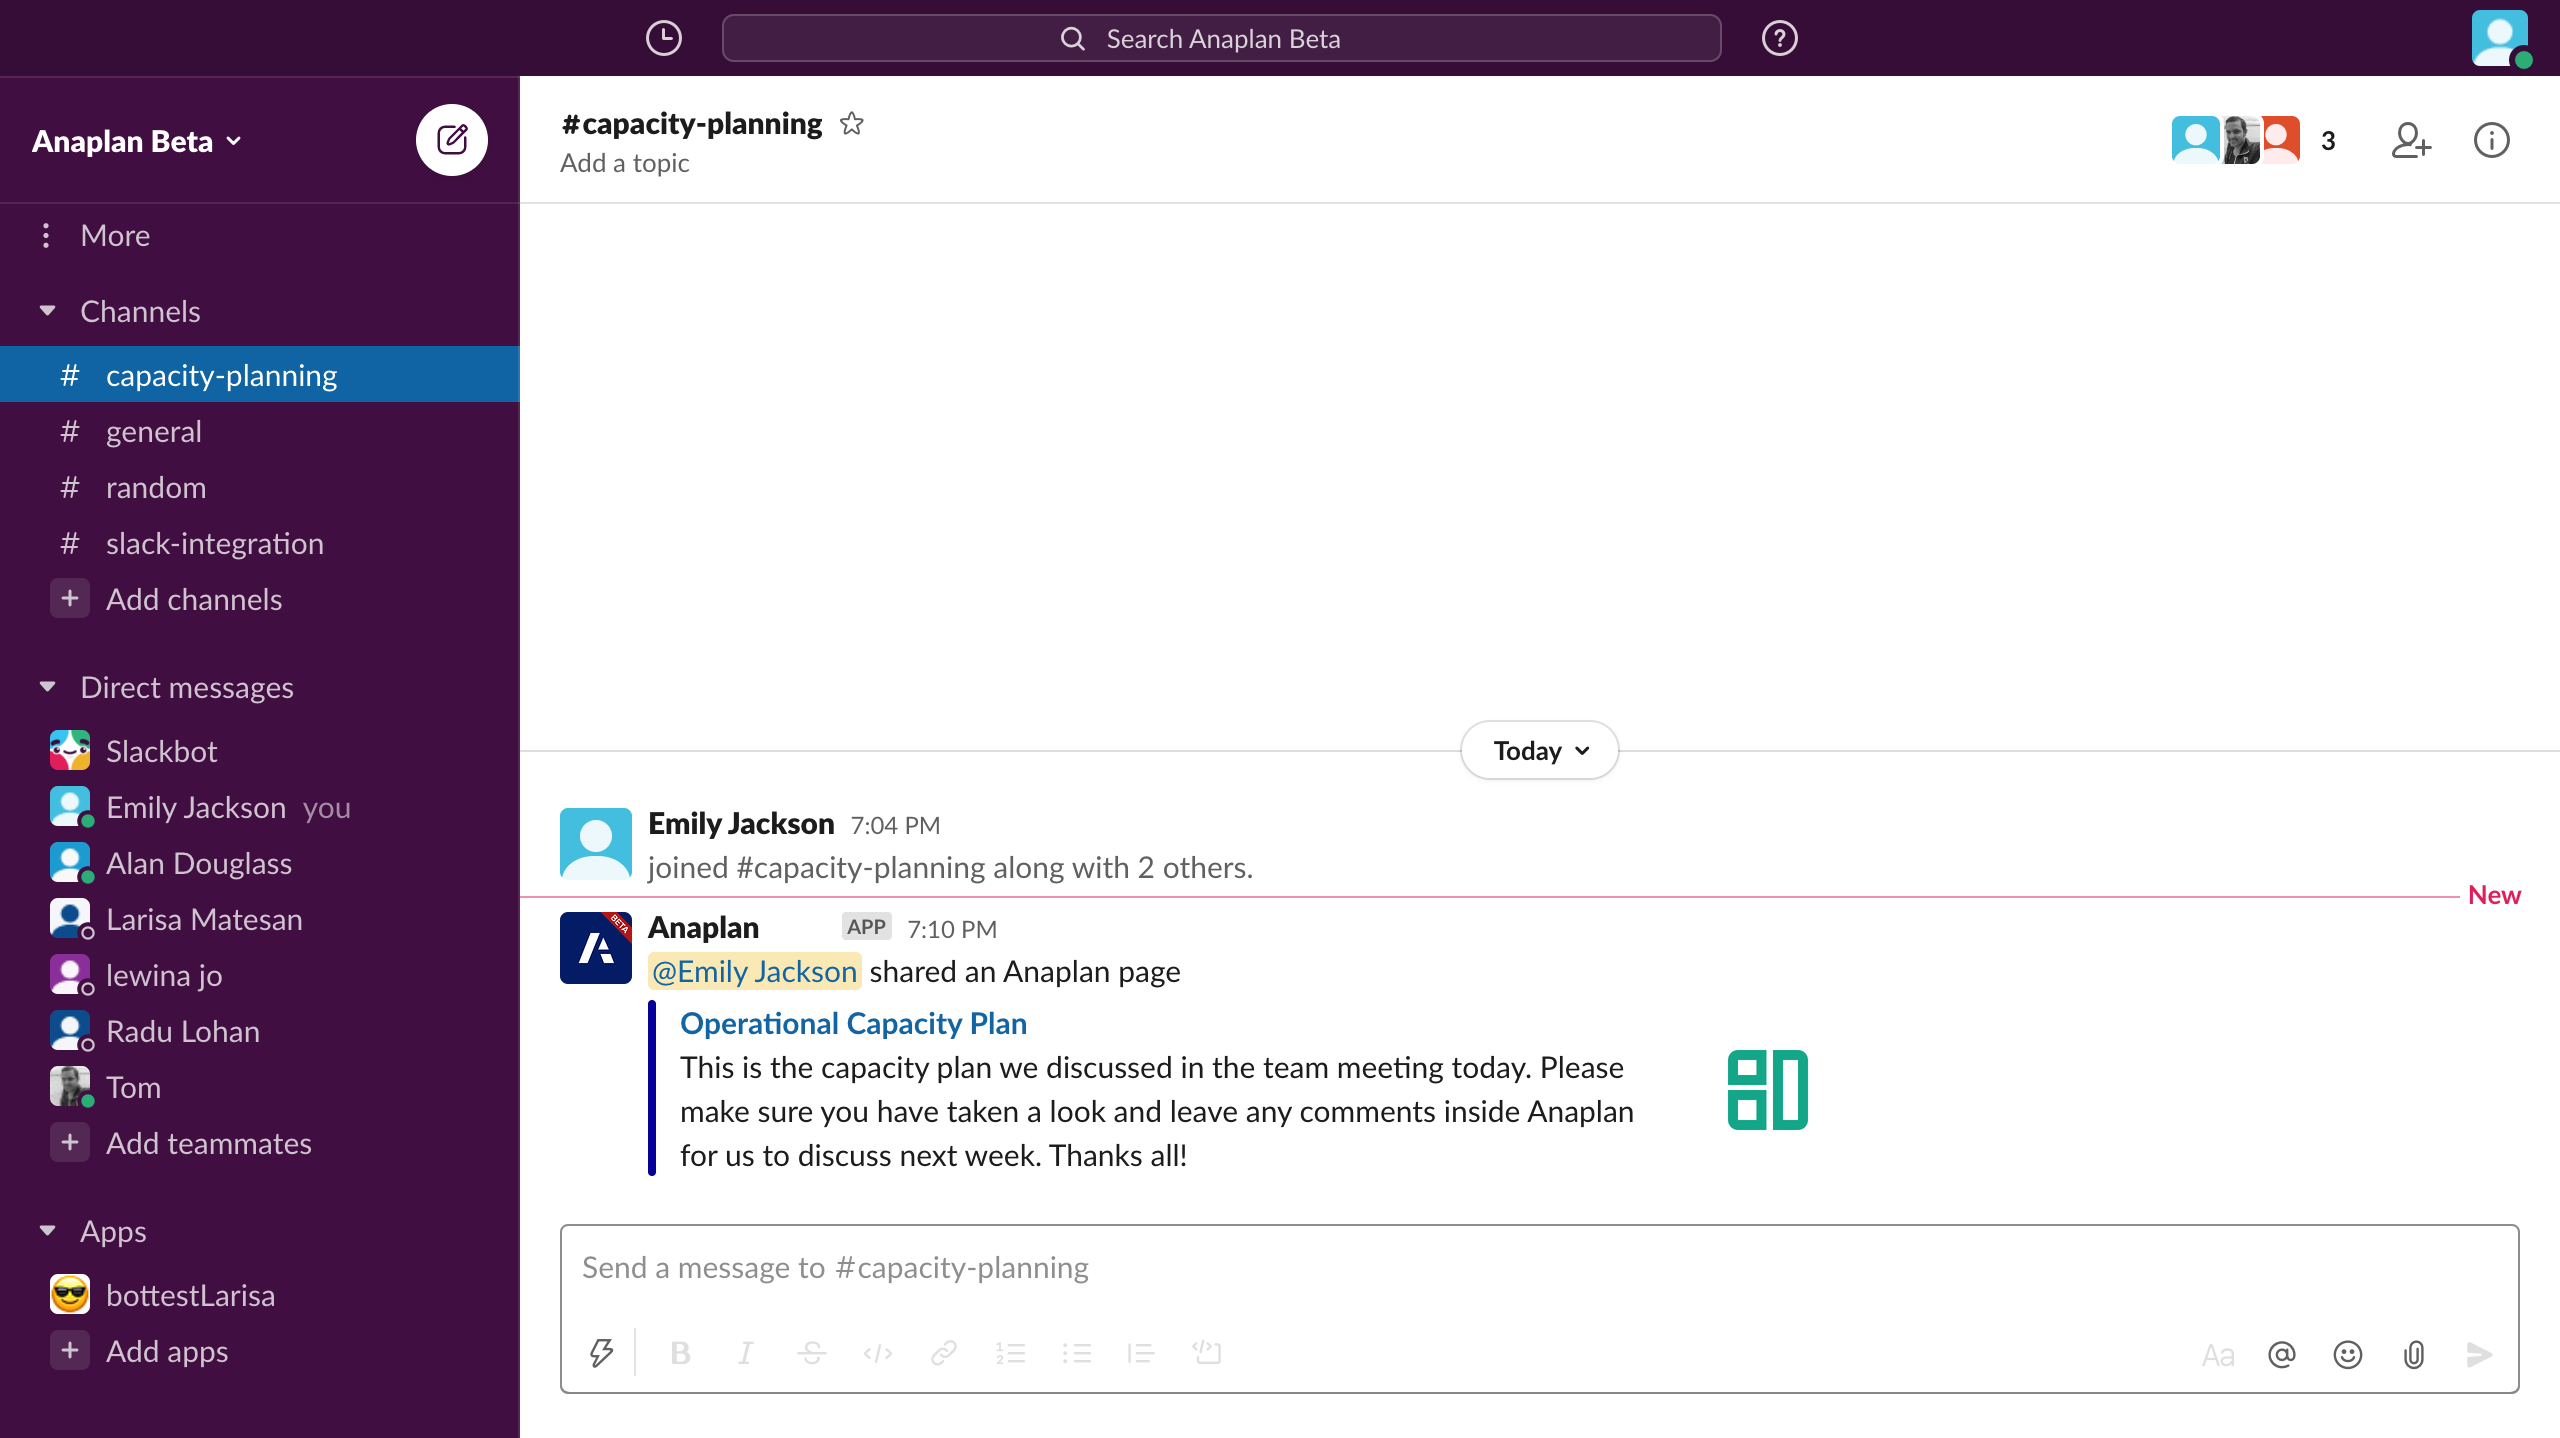 The selected Slack channel is displaying the shared Anaplan page.